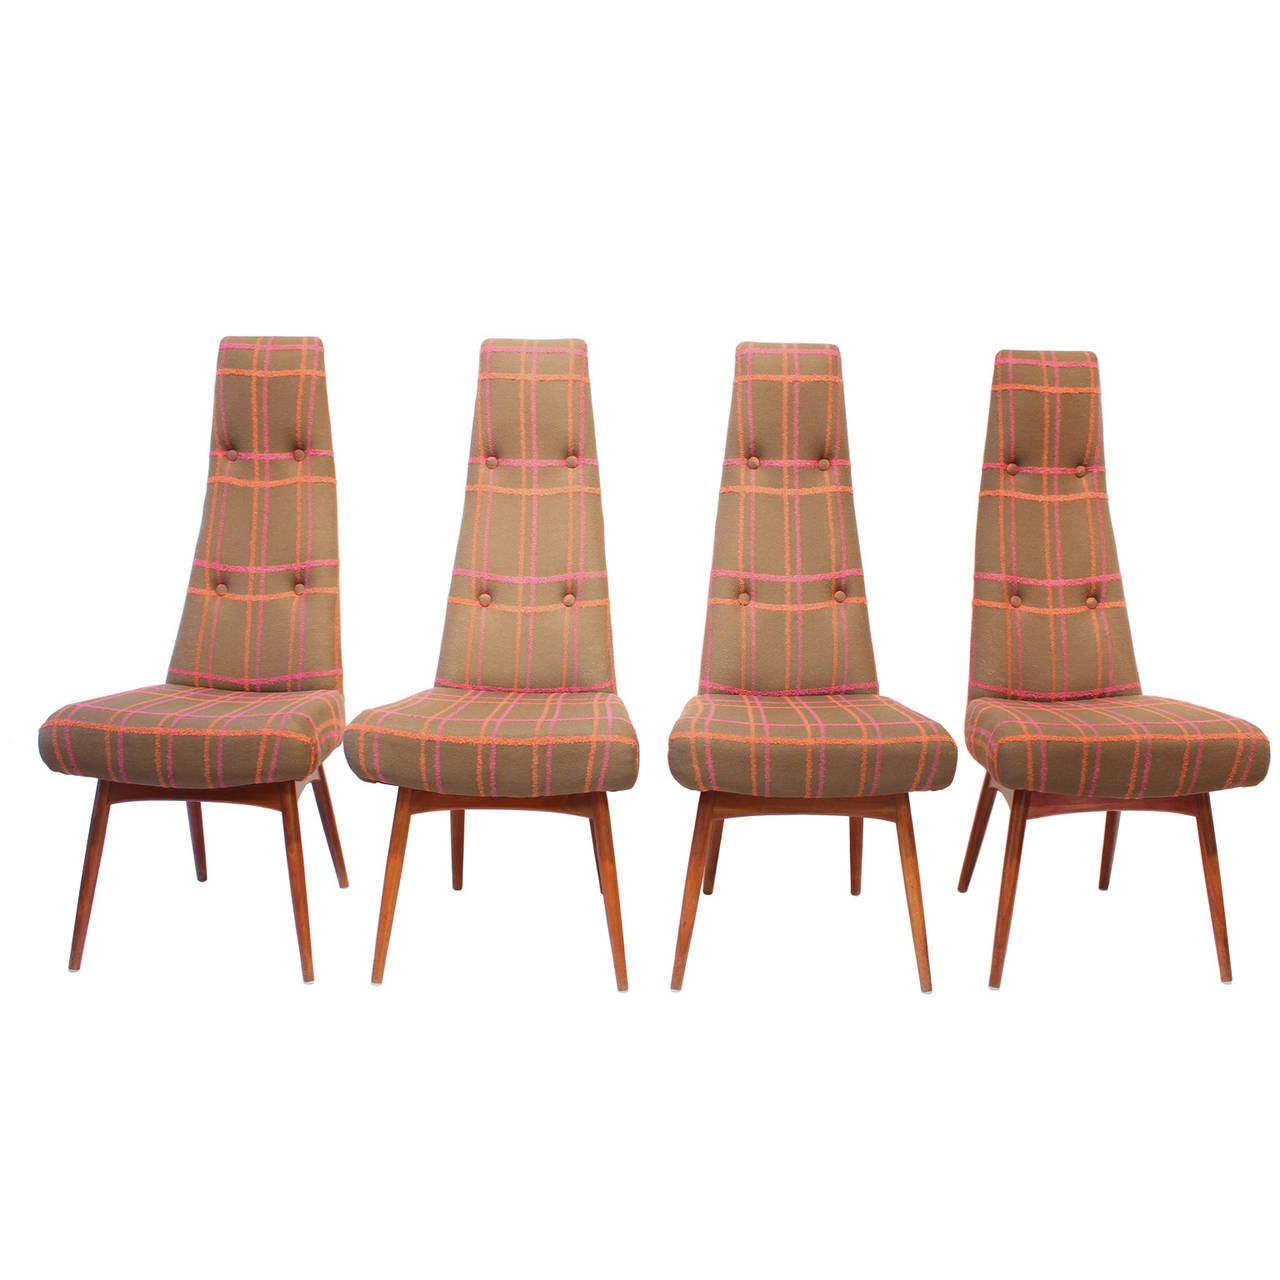 Four monumental Adrian Pearsall commander dining chairs upholstered in plaid wool.